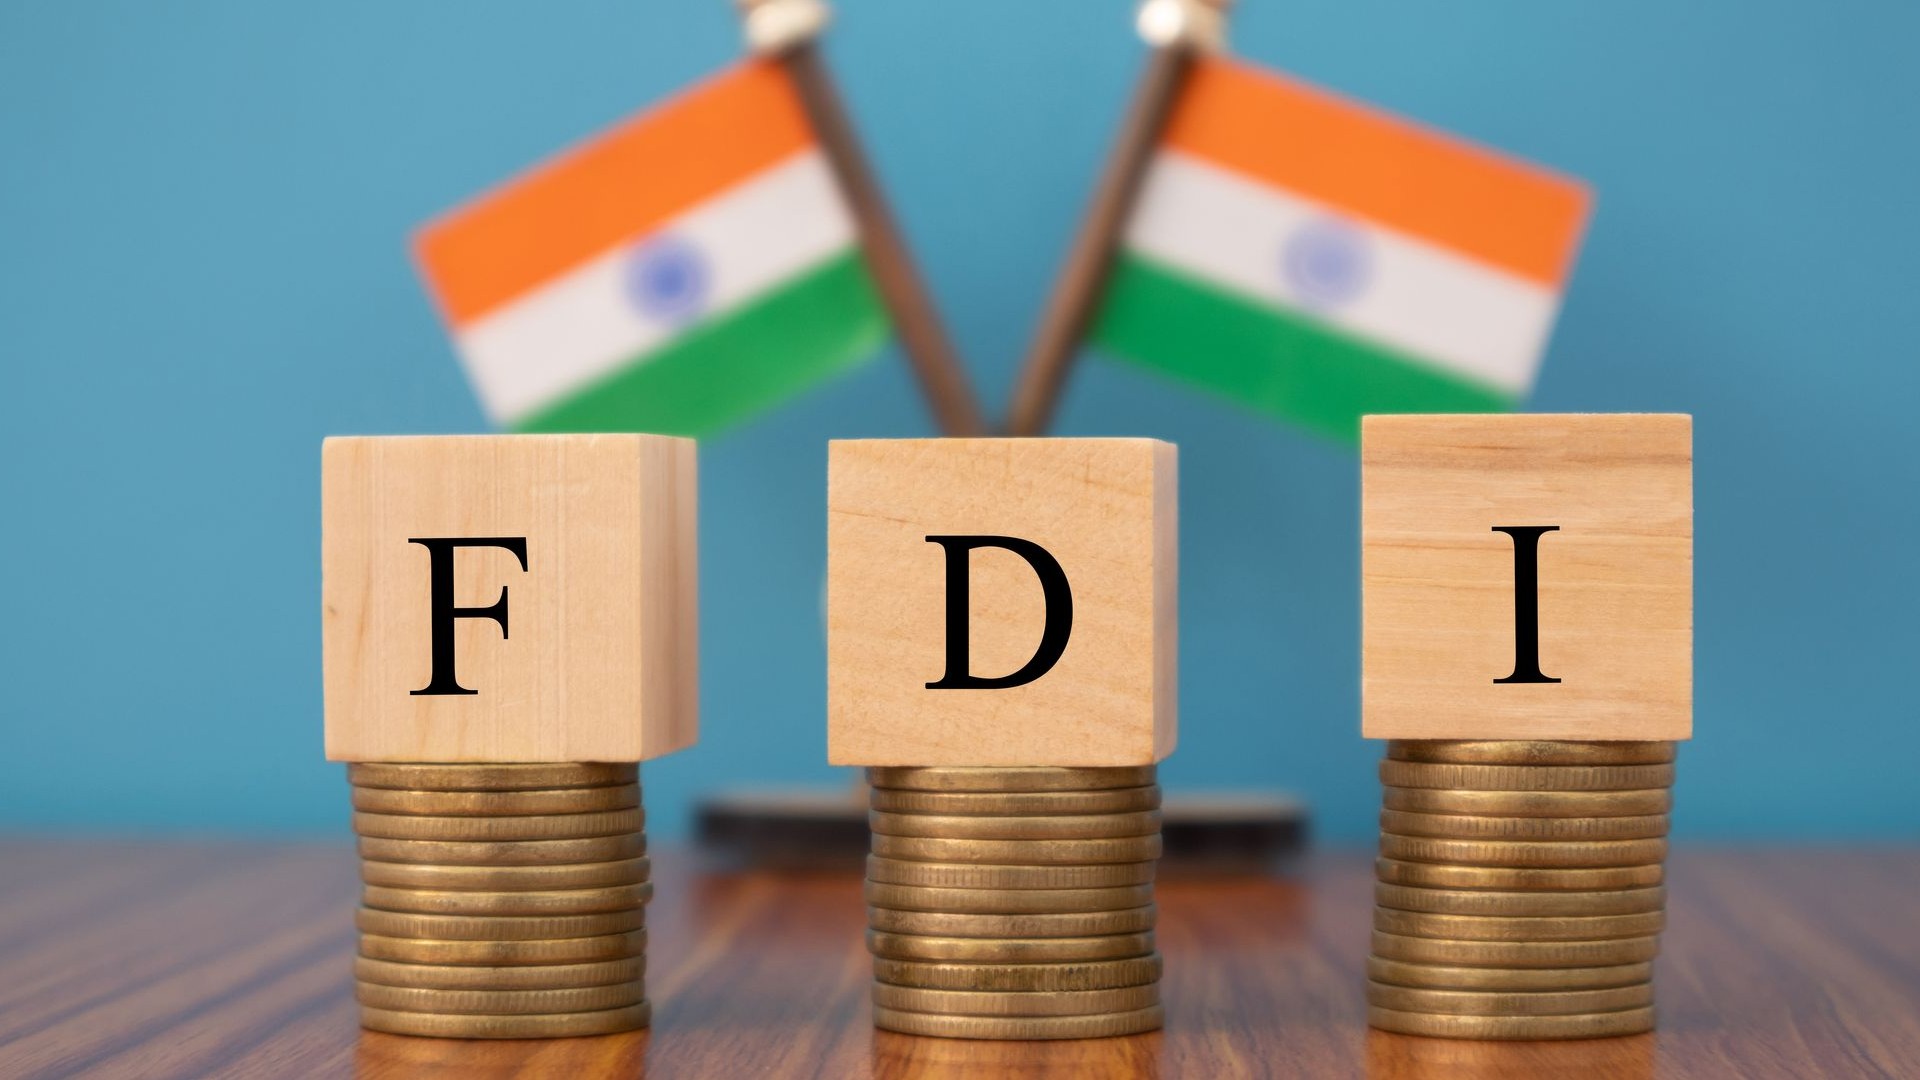 India receives Rs 5 lakh Crore FDI in 2020, making it the 5th largest FDI recipient globally!